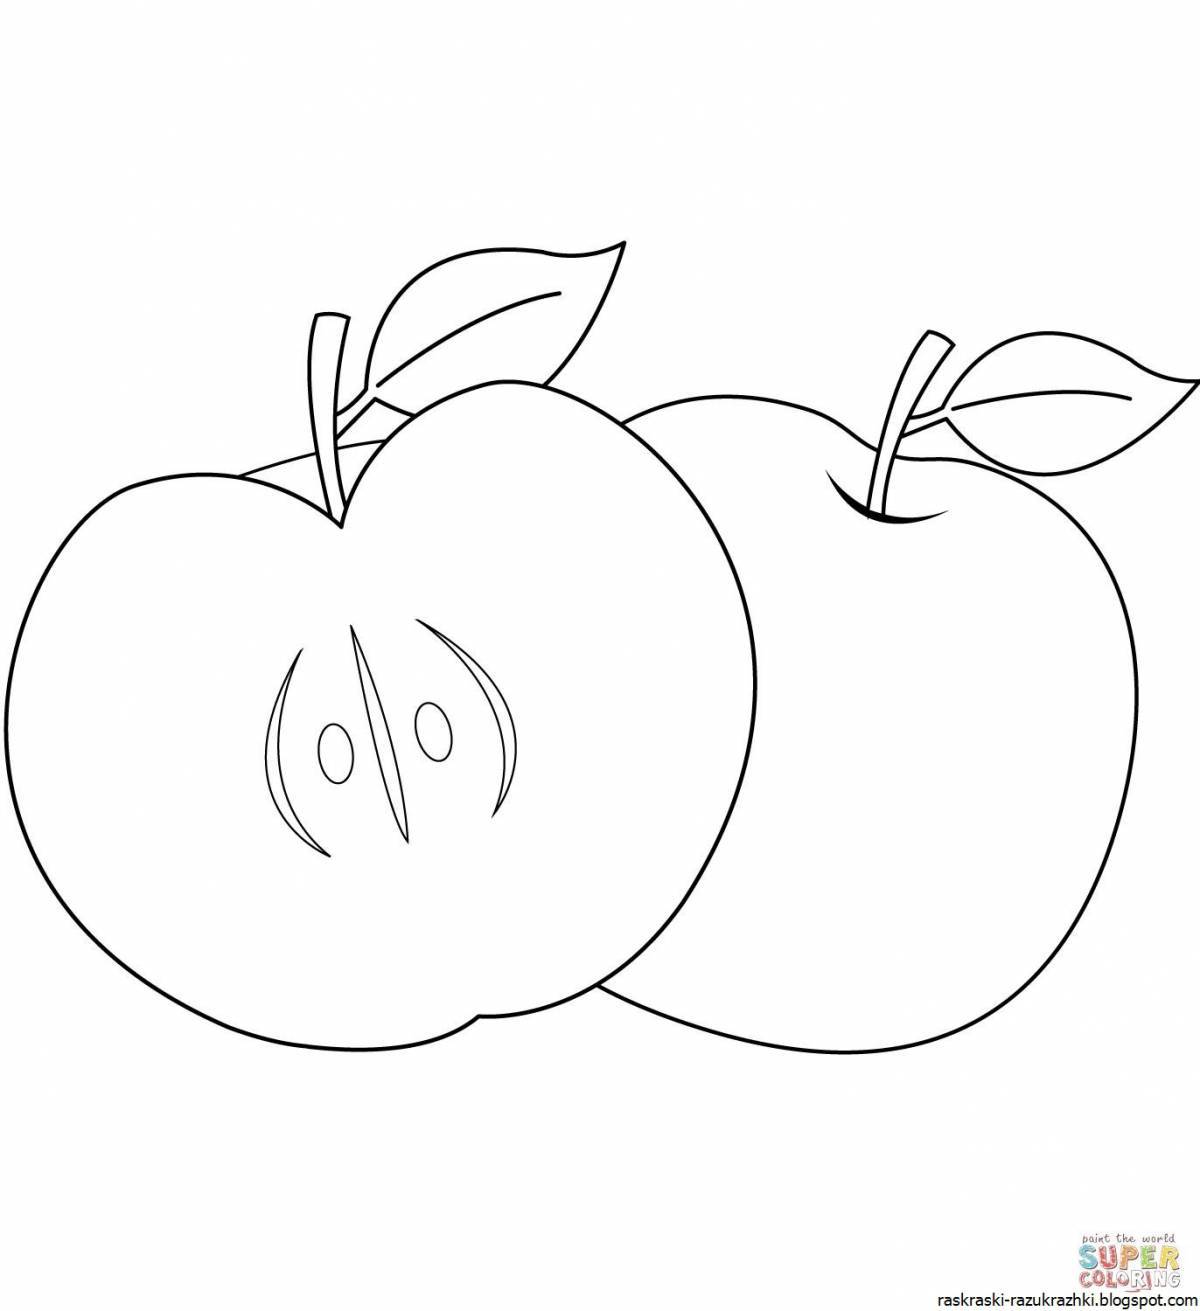 Bright apple coloring book for kids